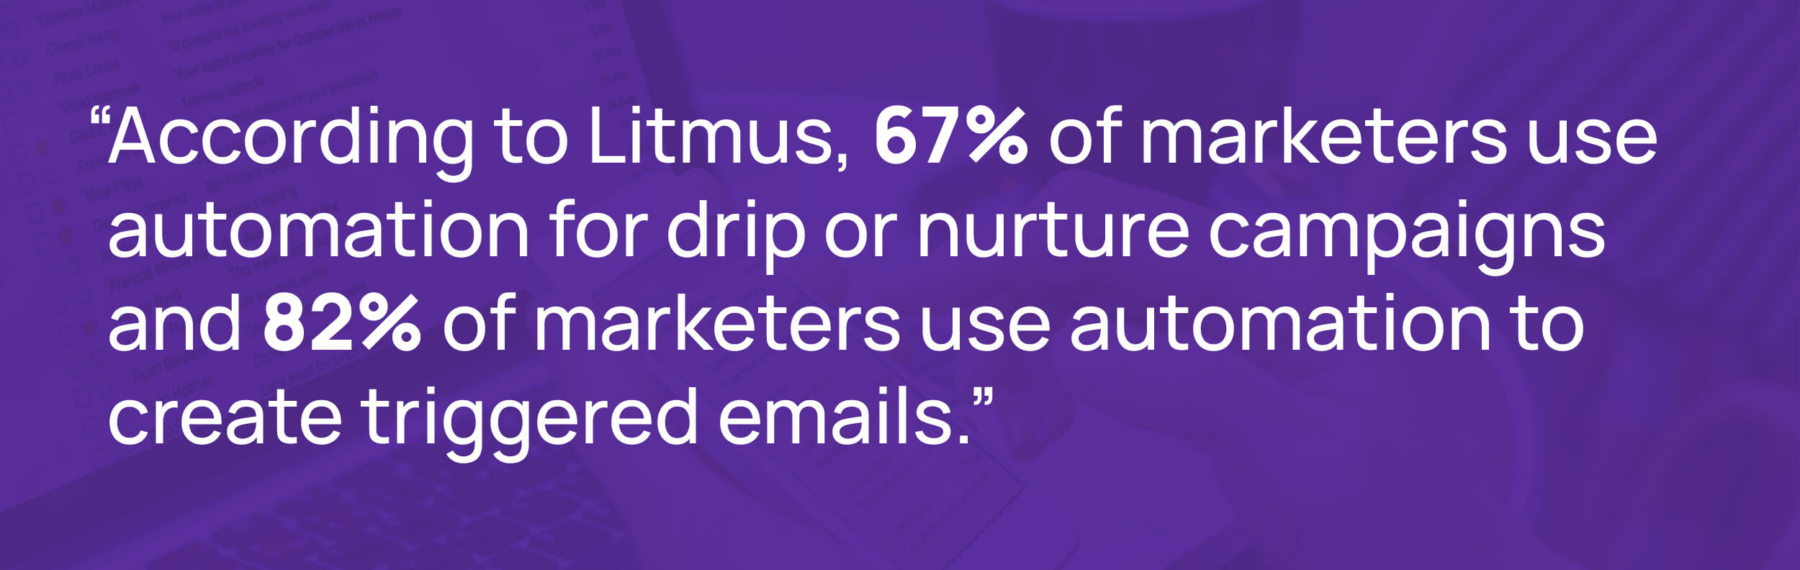 according to litmus, 67% of marketers use automation for drip or nurture campaigns and 82% of marketers use of use automation to create triggered emails.